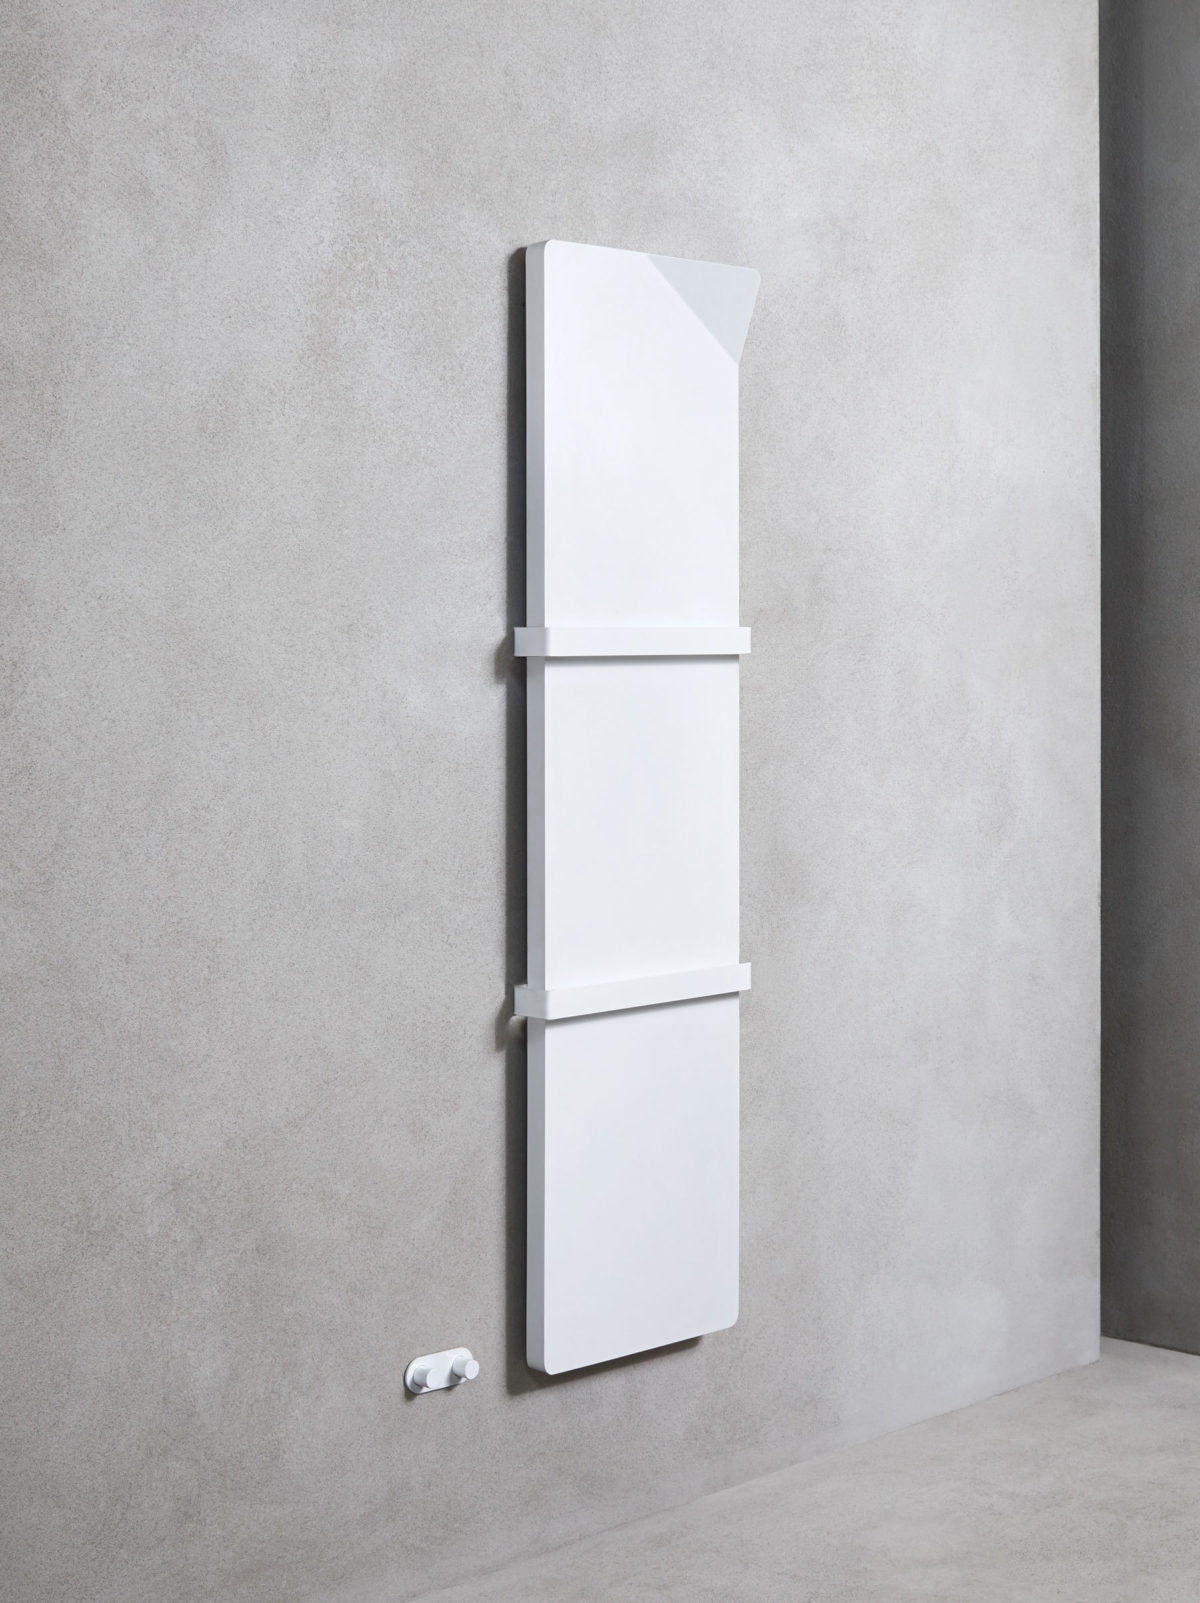 Radiator Book Bagno by Caleido